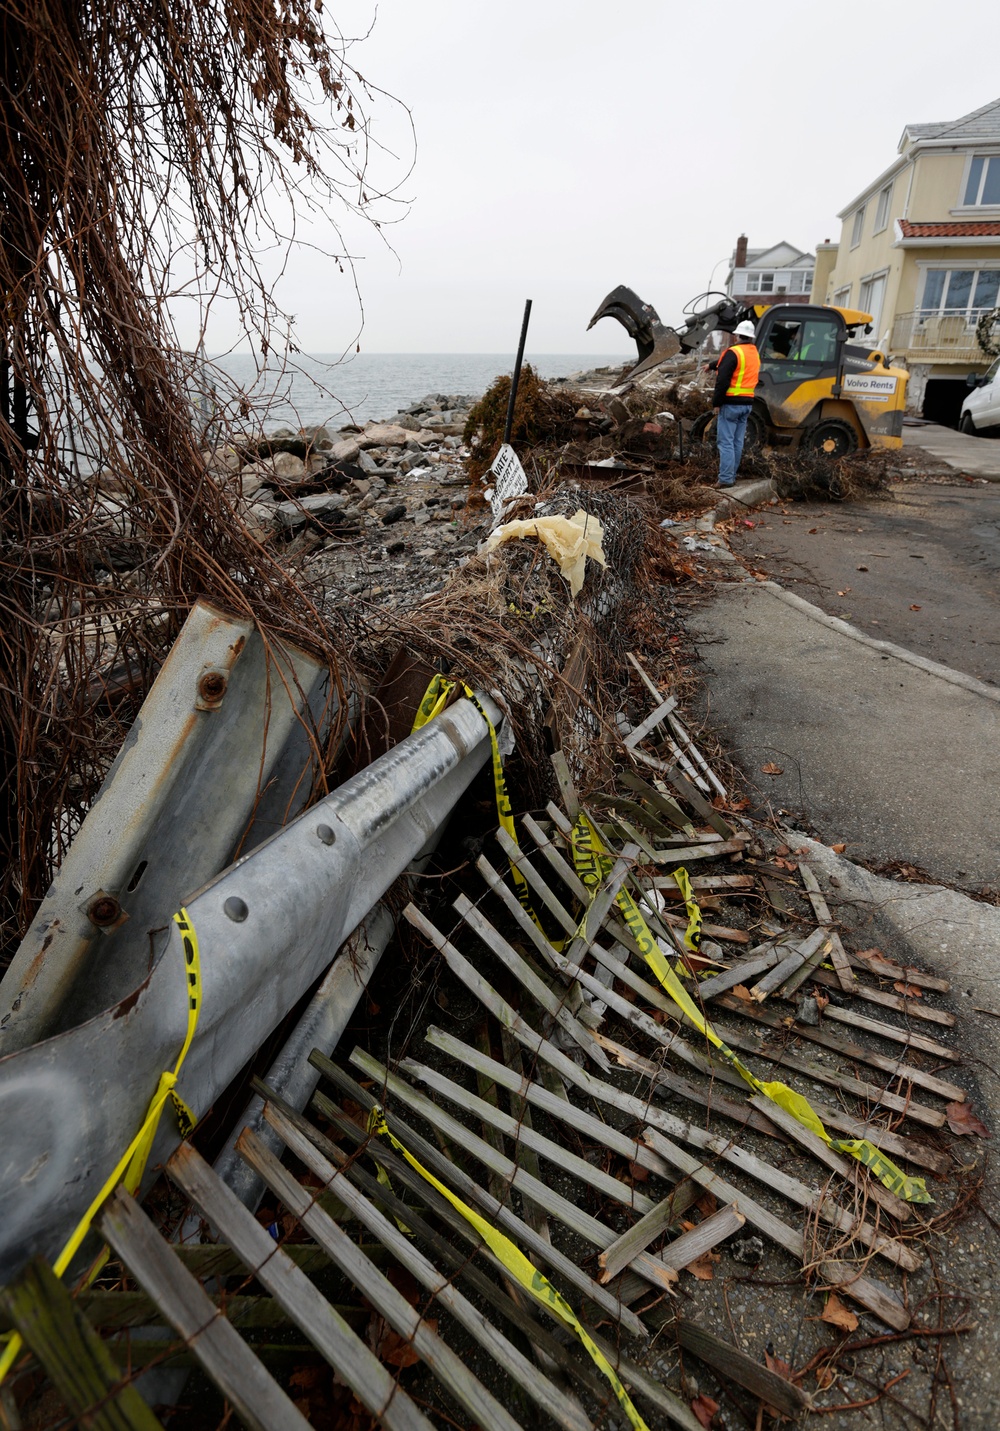 Debris Cleanup in Brooklyn, NY